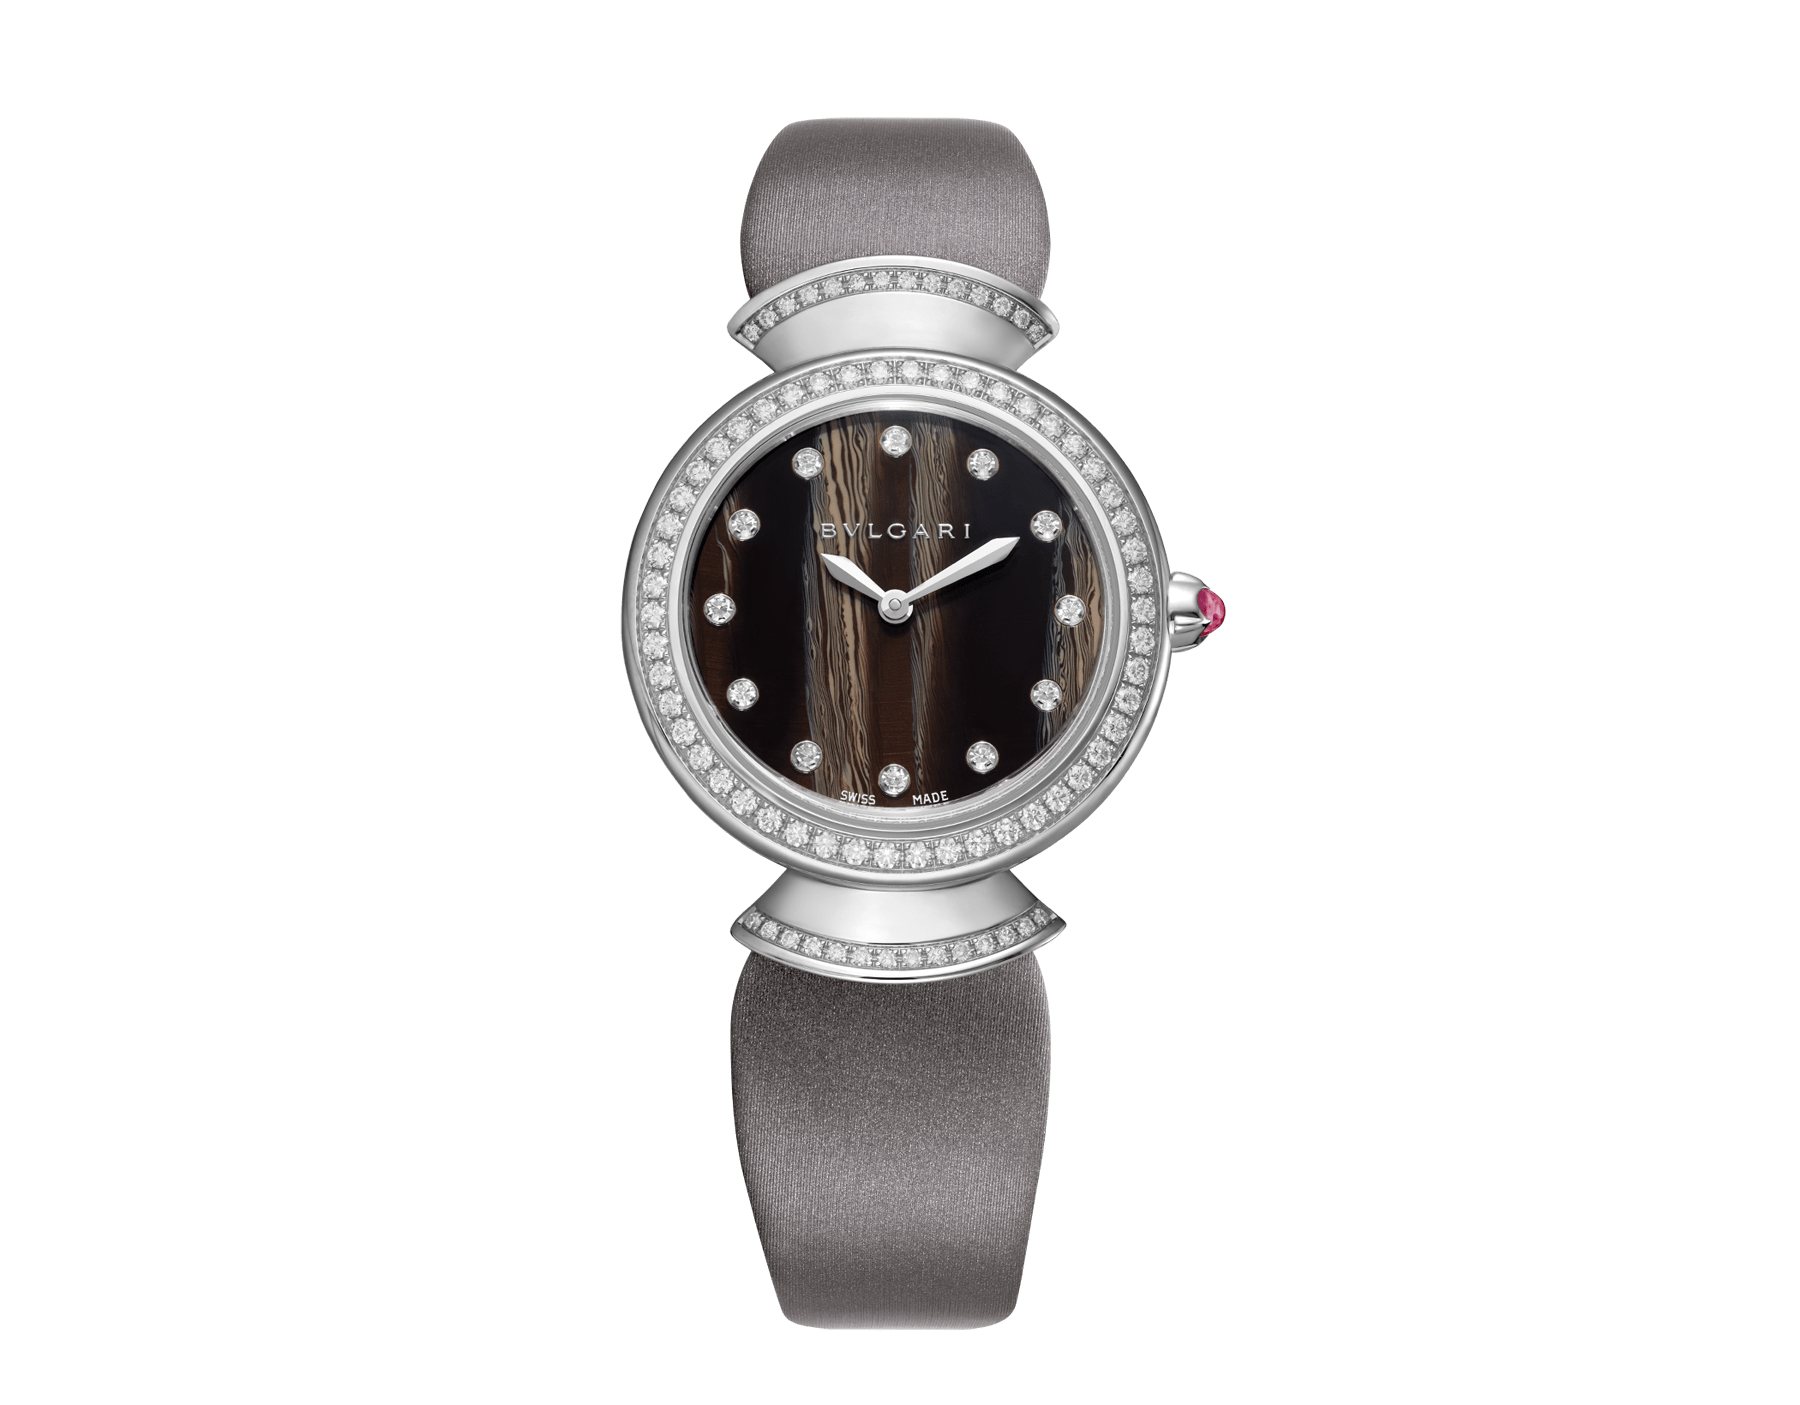 DIVAS' DREAM watch with 18 kt white gold case set with brilliant-cut diamonds, natural acetate dial, diamond indexes and grey satin bracelet 102434 image 1